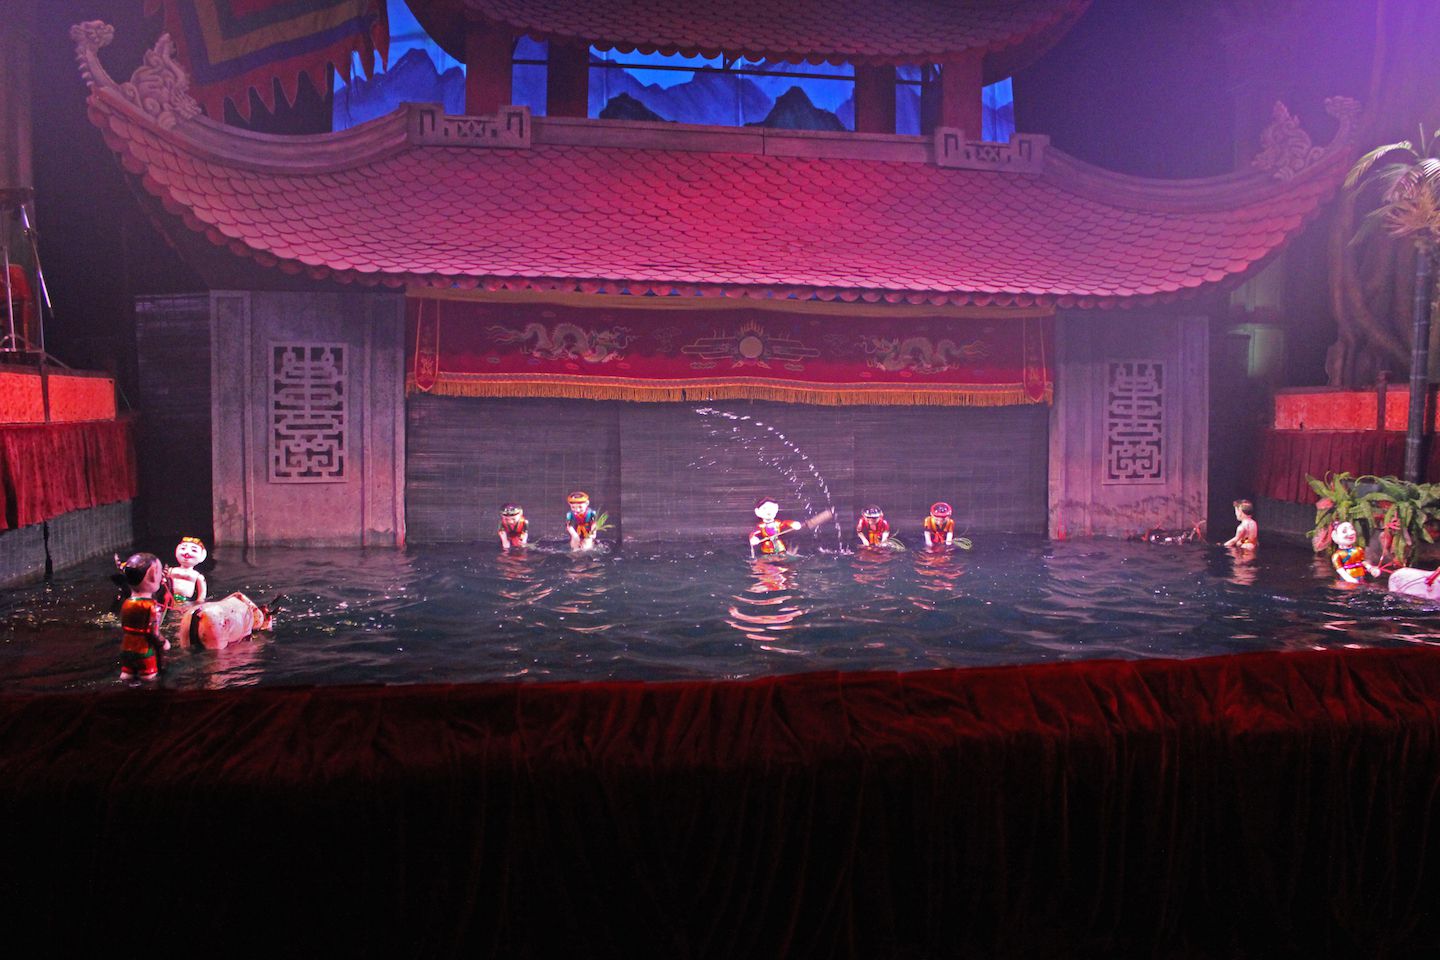 Farmers at the Hanoi's Water Puppet show